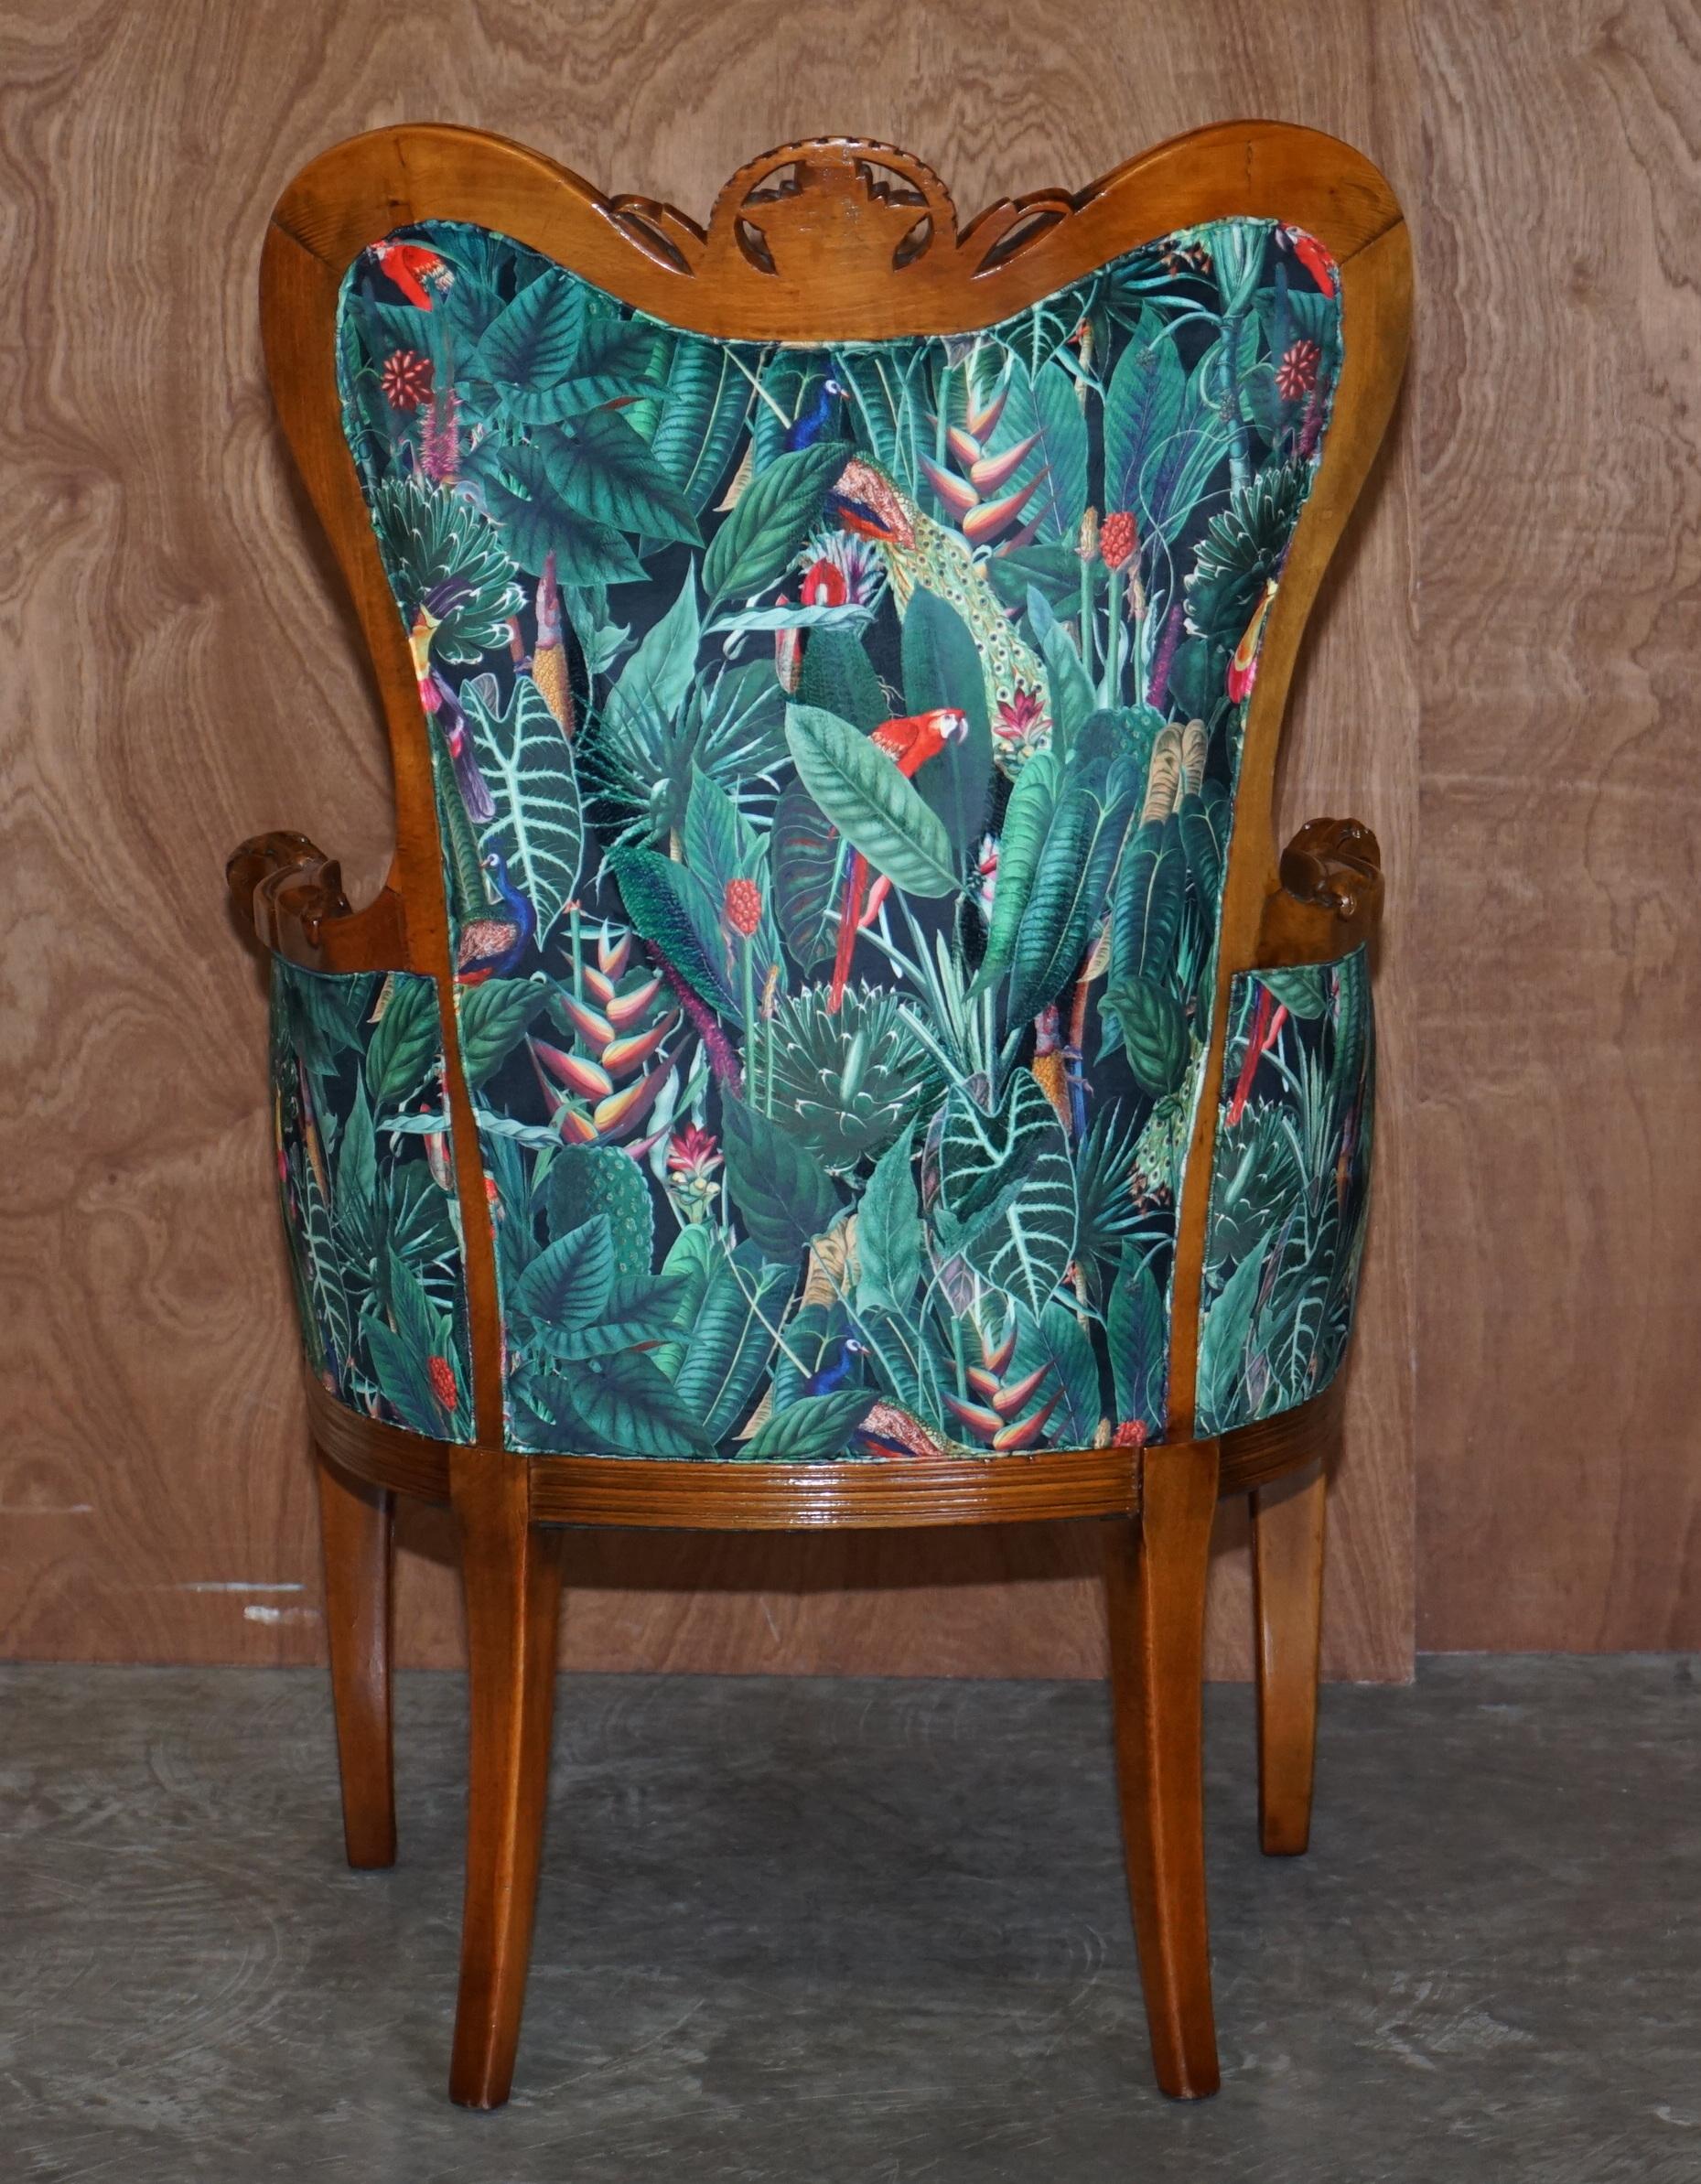 Lovely Vintage Italian Carved Walnut Armchair with Birds of Paradise Upholstery For Sale 7